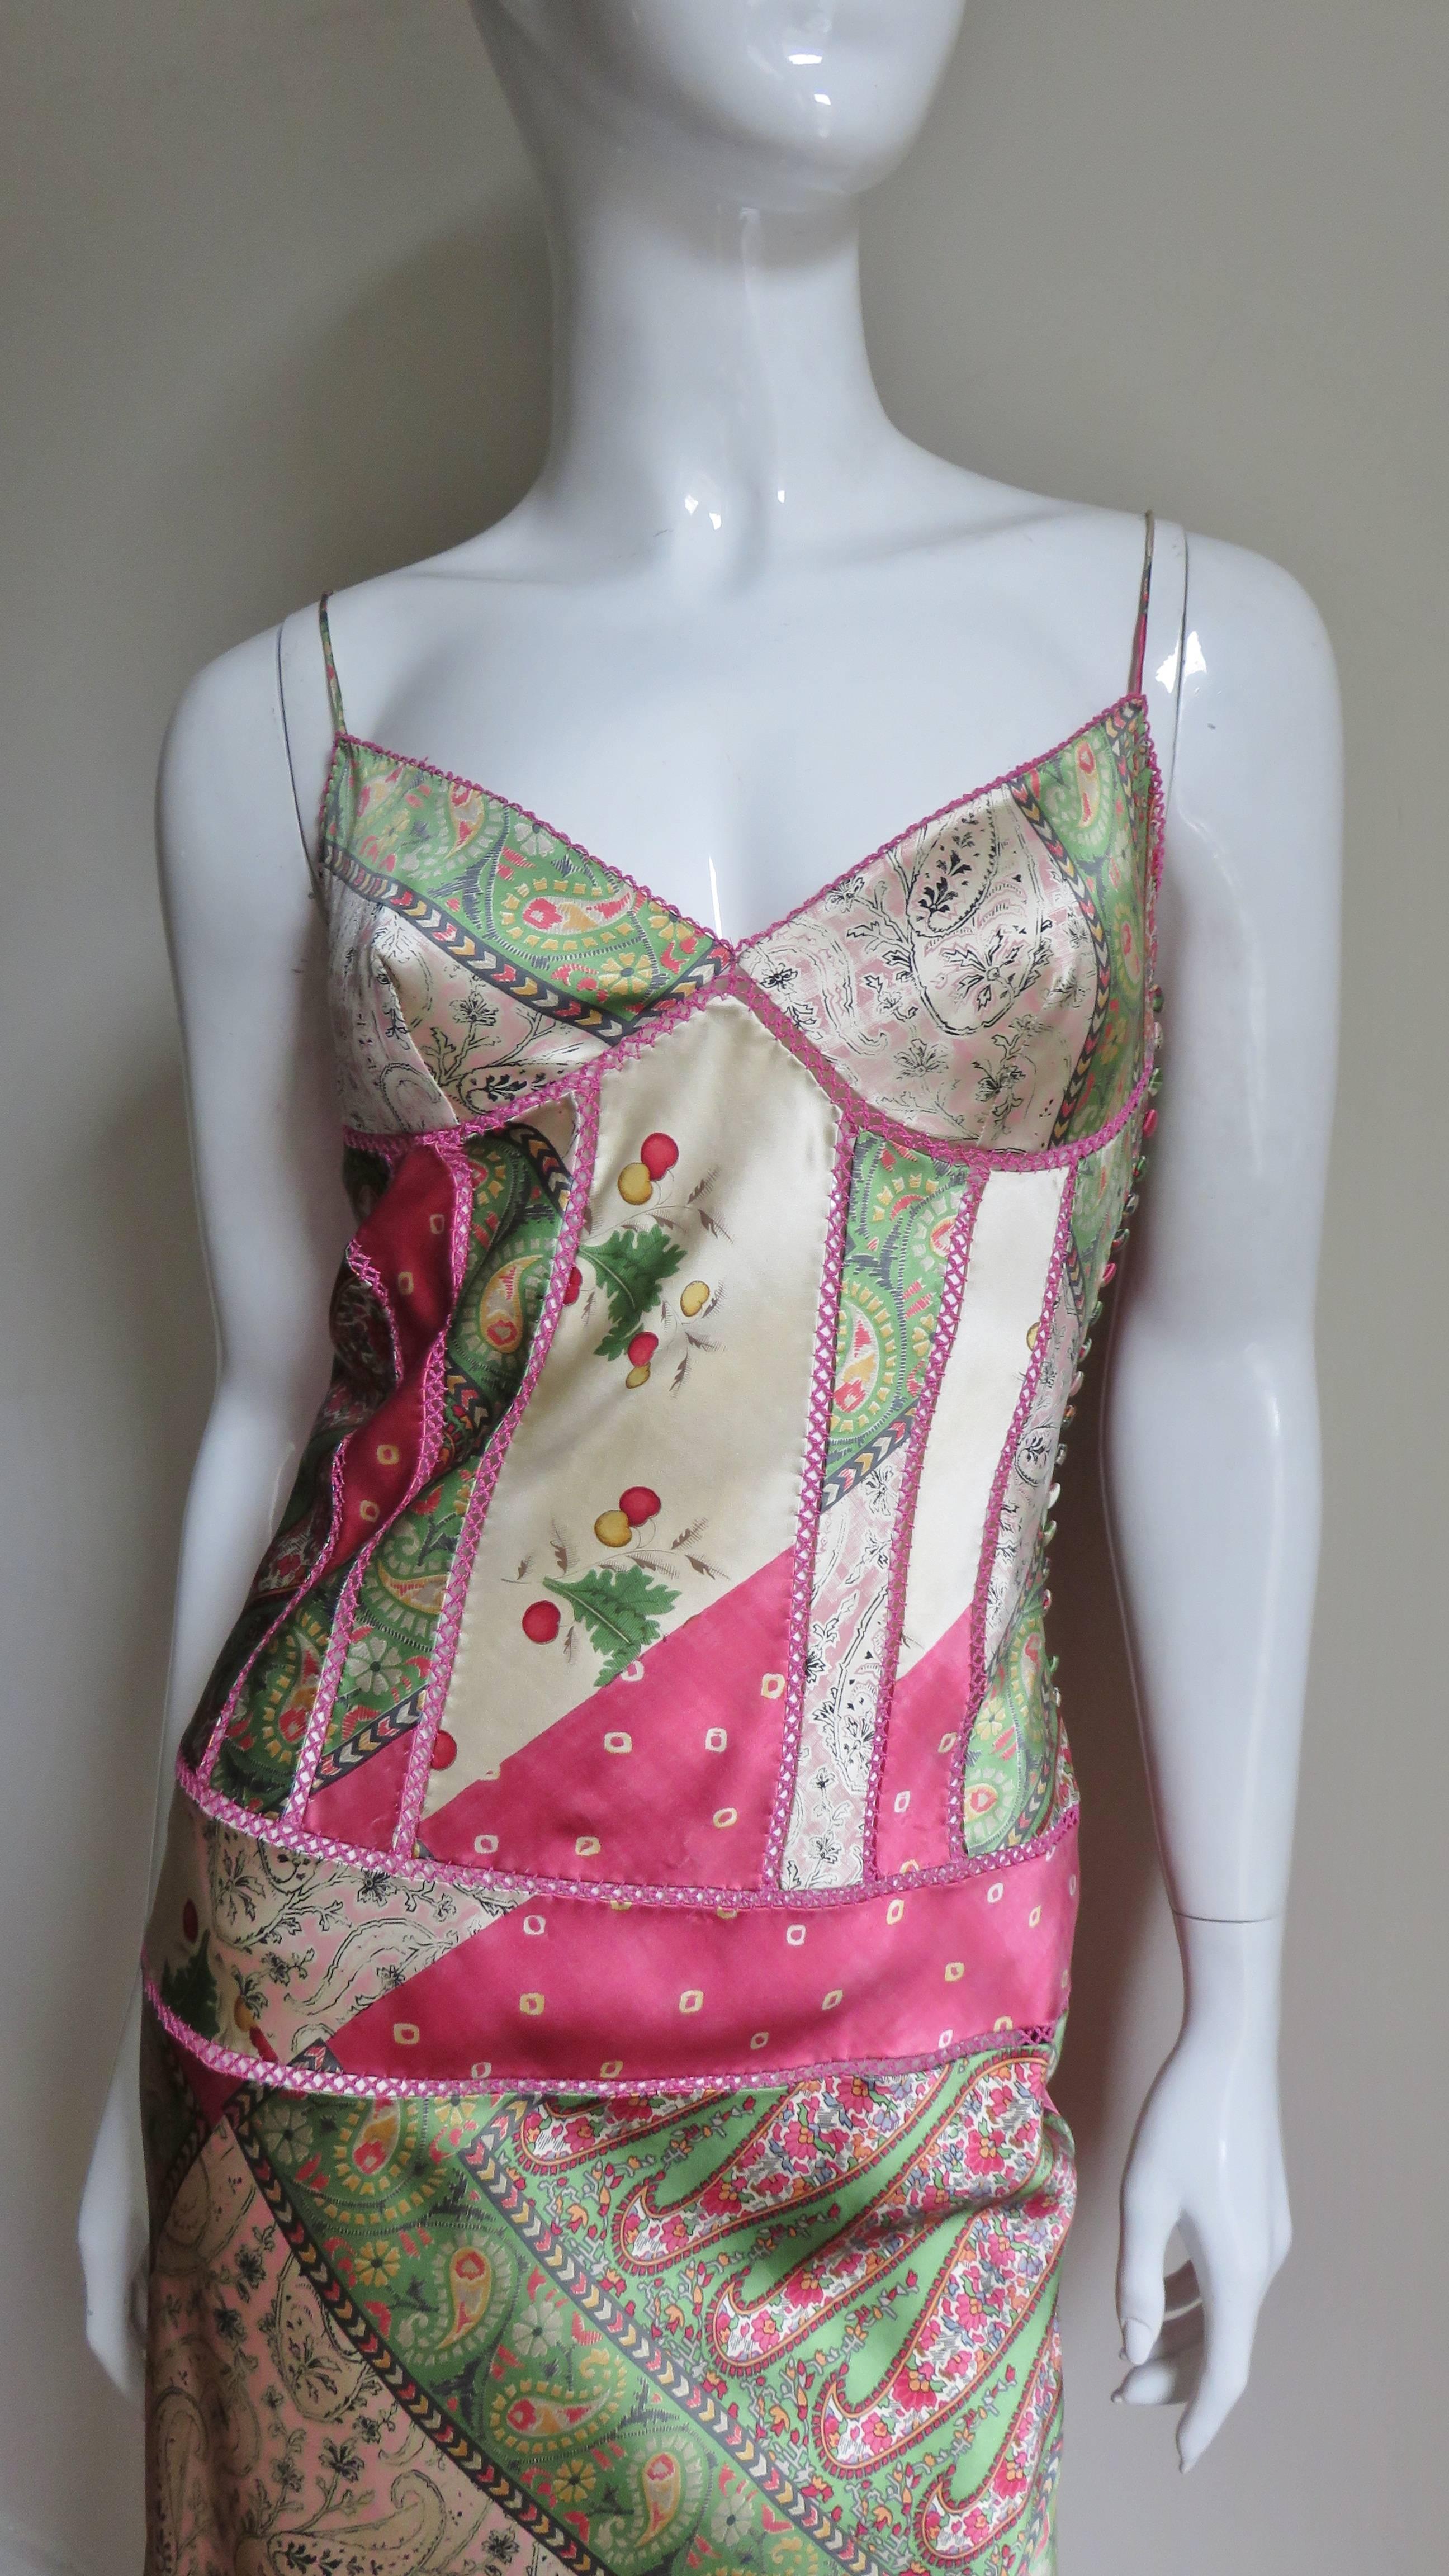 A gorgeous silk dress from John Galliano for Christian Dior in a pink, green and off white mixed pattern of elaborate paisleys and abstract shapes. The slip style dress has spaghetti straps and a highlighted vertical seamed bodice using an elaborate